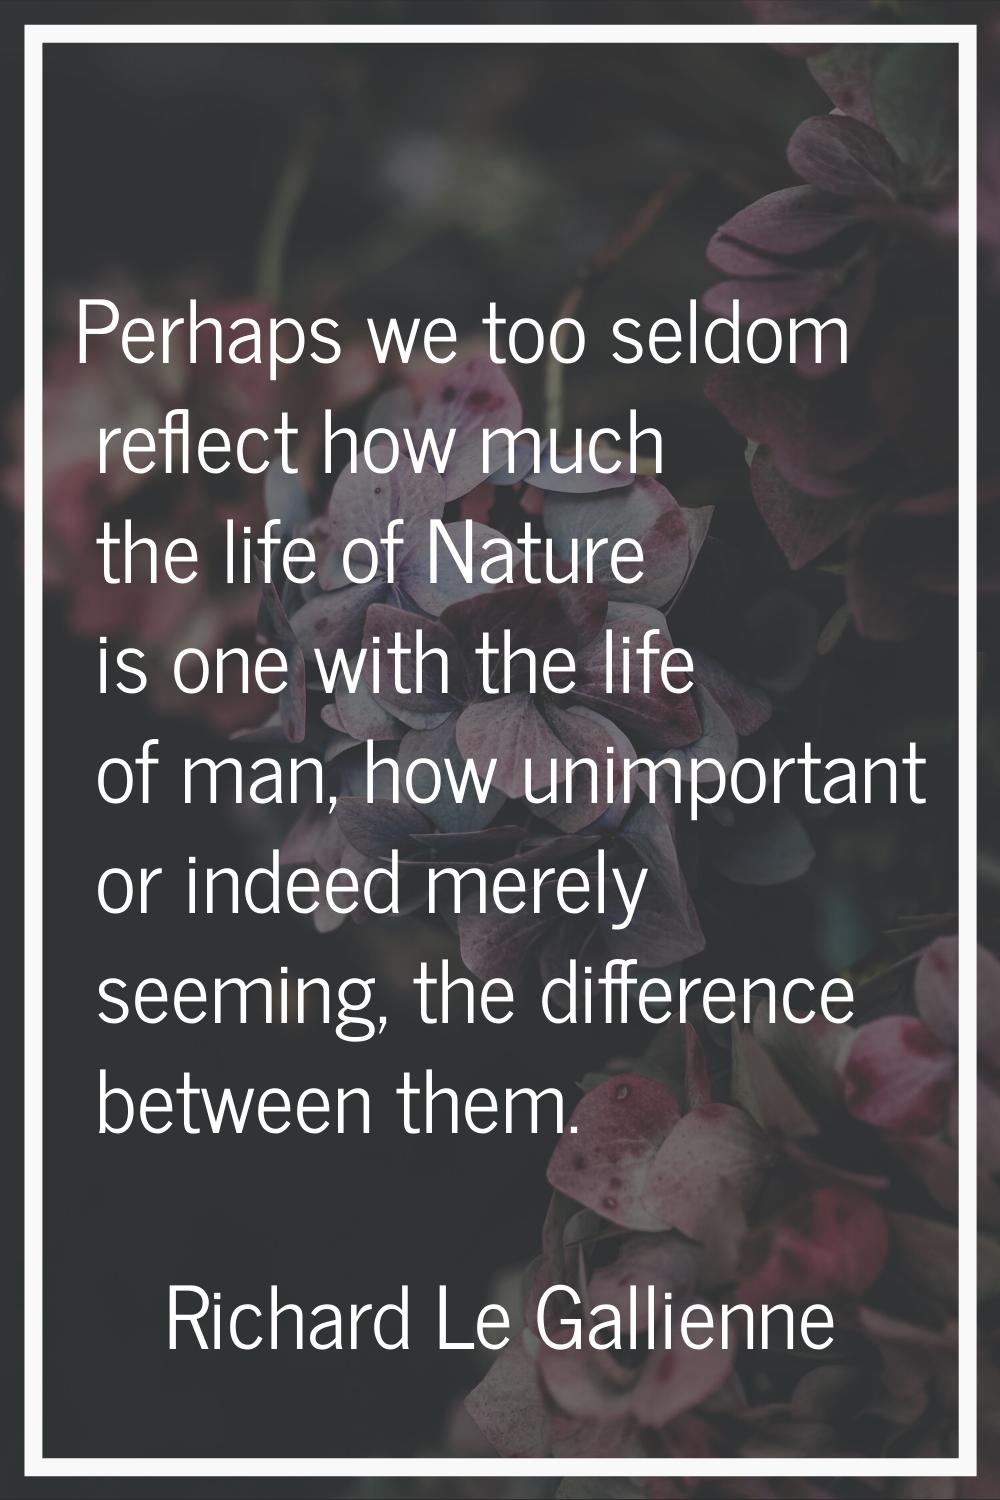 Perhaps we too seldom reflect how much the life of Nature is one with the life of man, how unimport